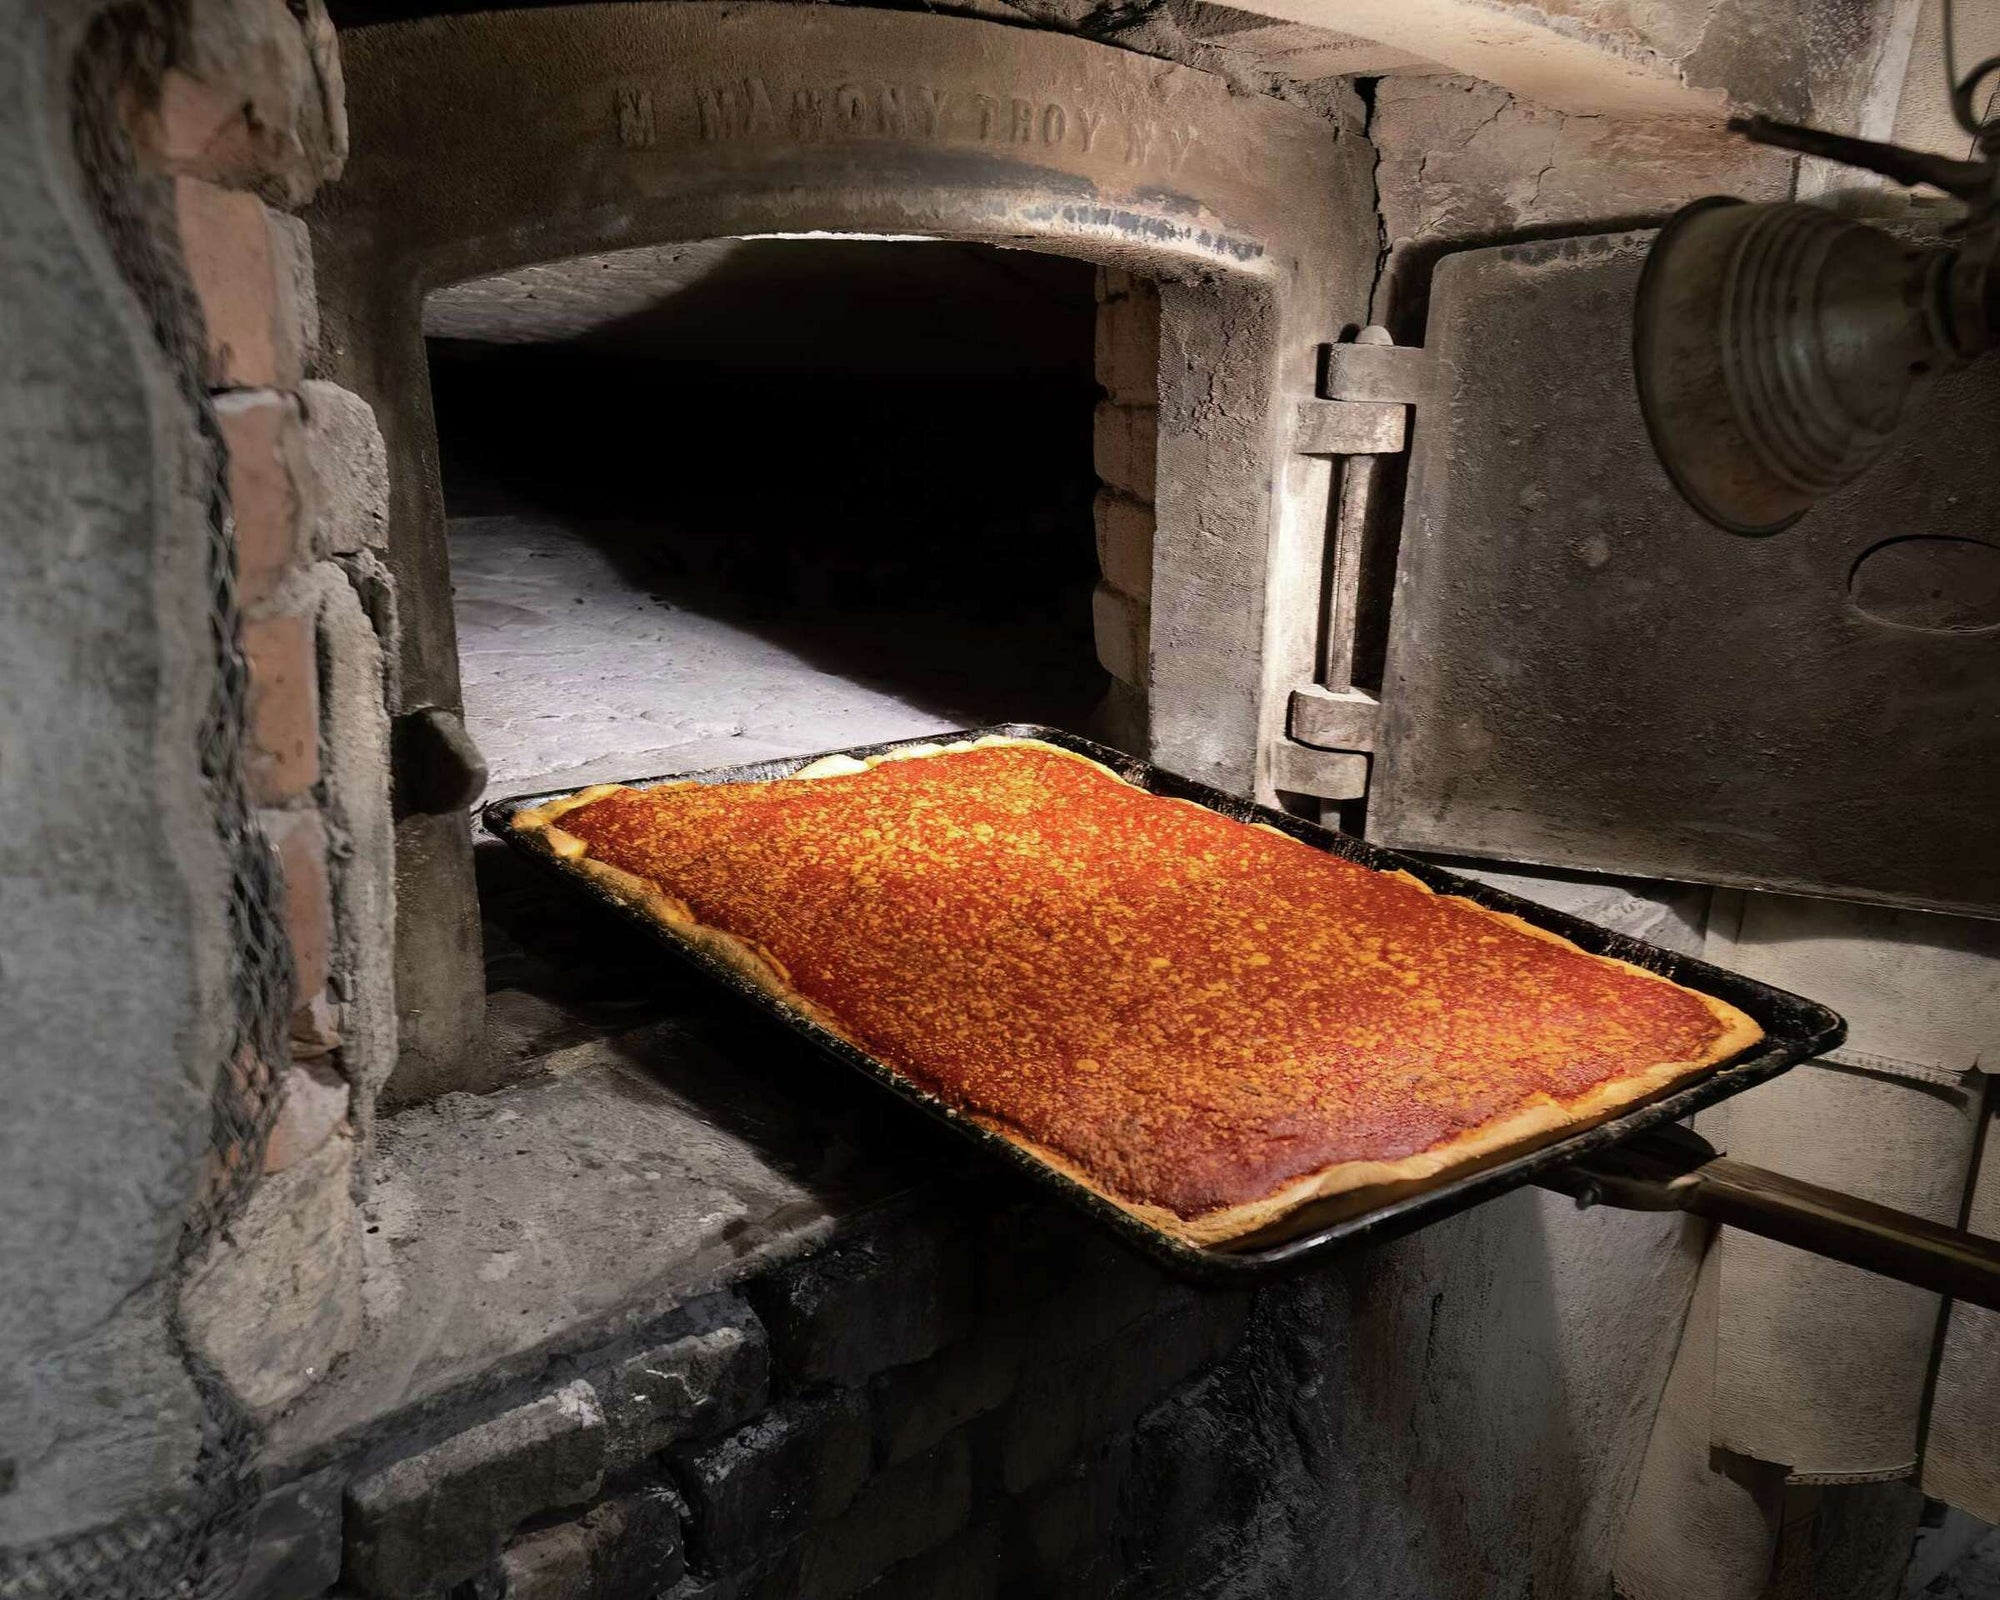 Tracing Perreca's 109-year-old tomato pie history with owner Maria Papa